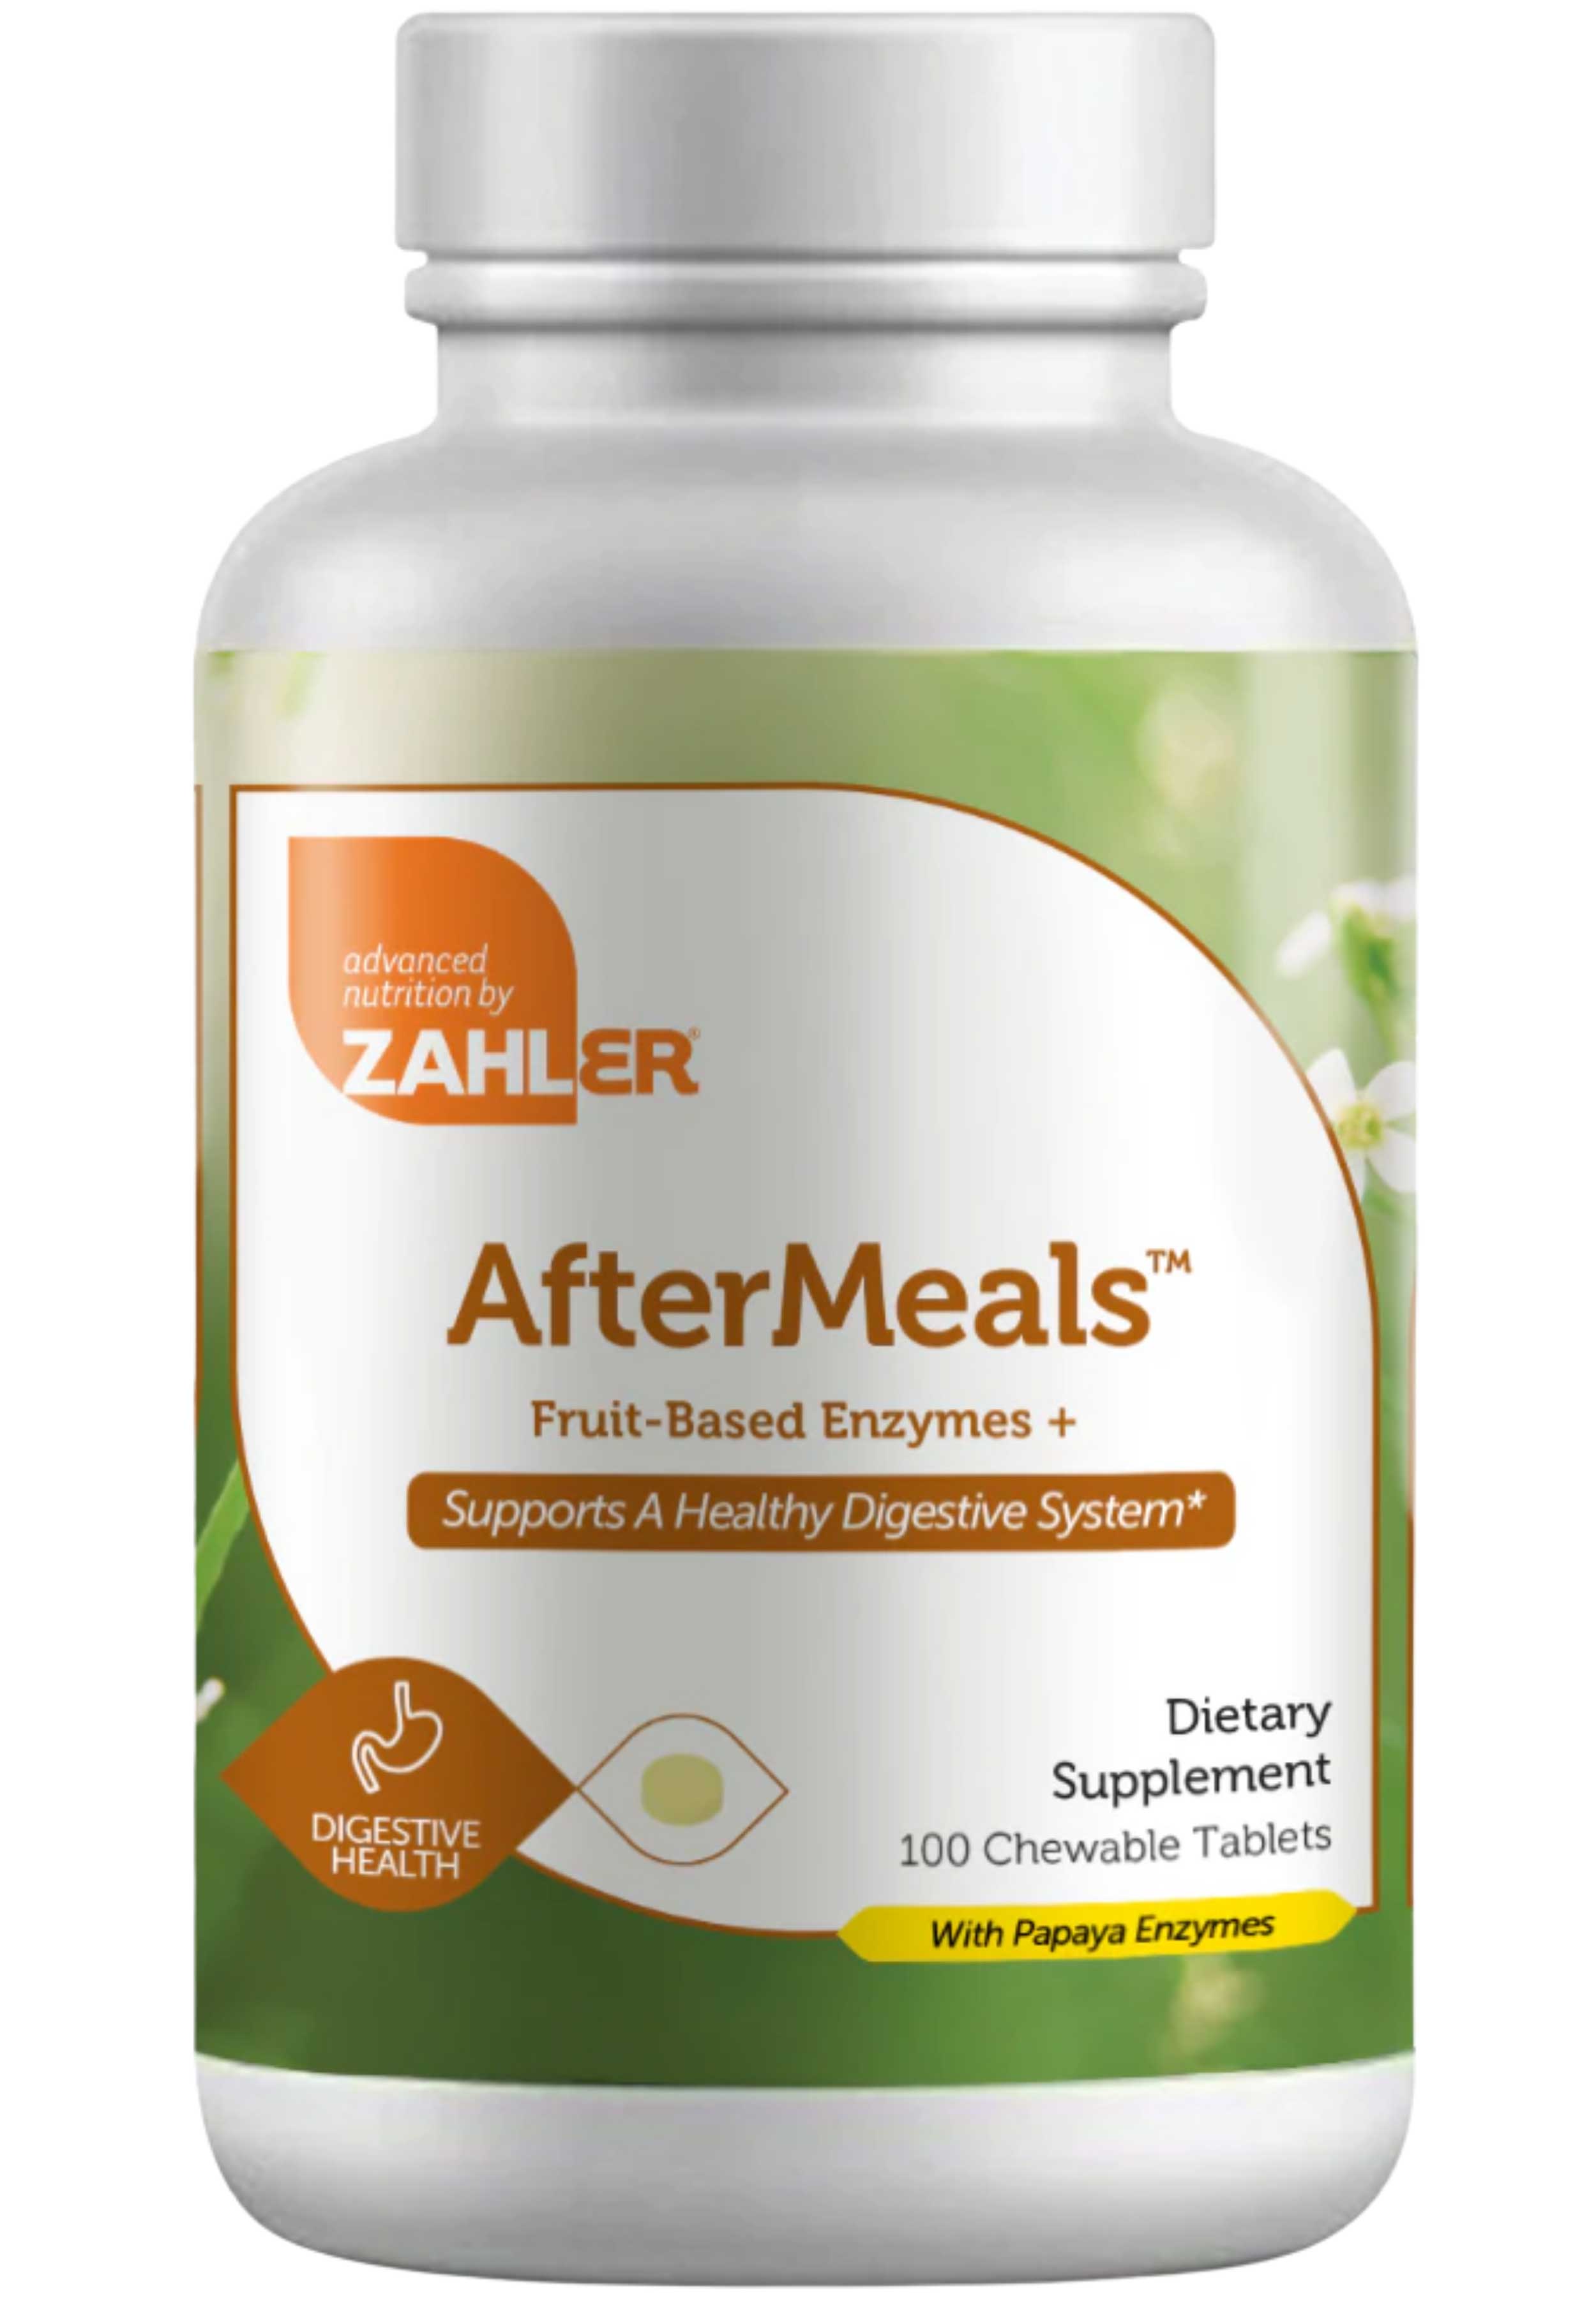 Advanced Nutrition By Zahler AfterMeals